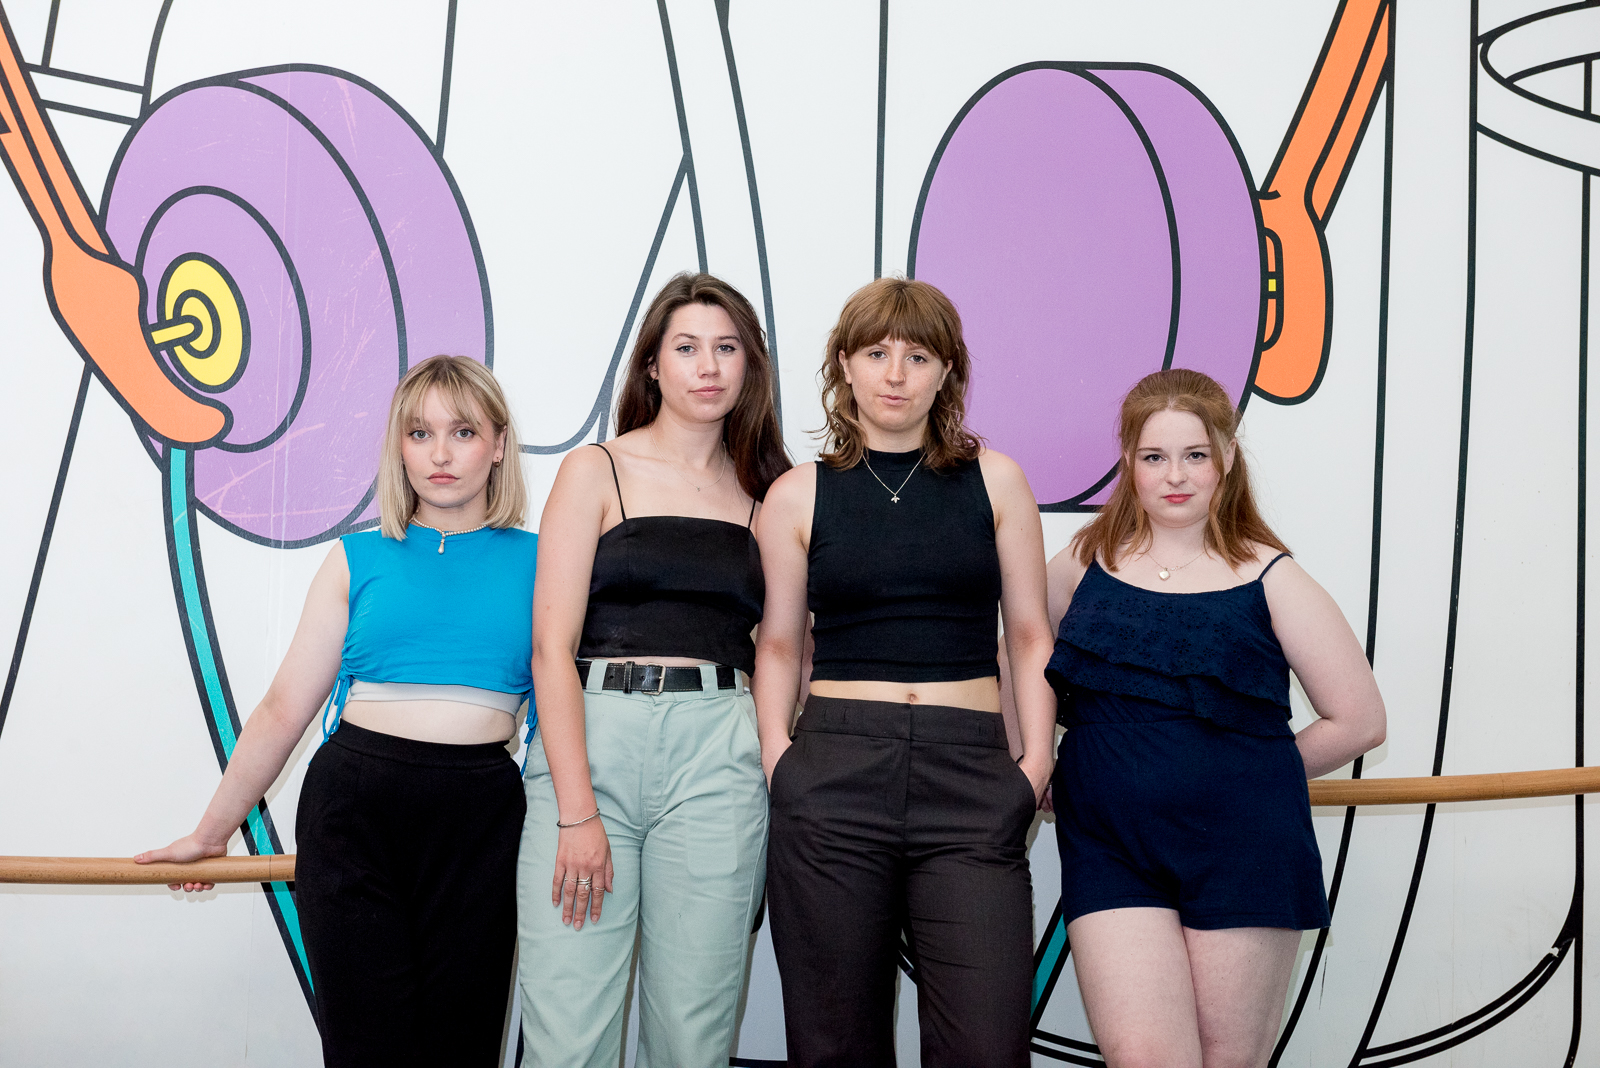 Phoebe Noble, Natasha Spencer Levy, Ellie Drayton and Holly McConville all leaning against a wooden bar with a coloured illustration on the wall behind them